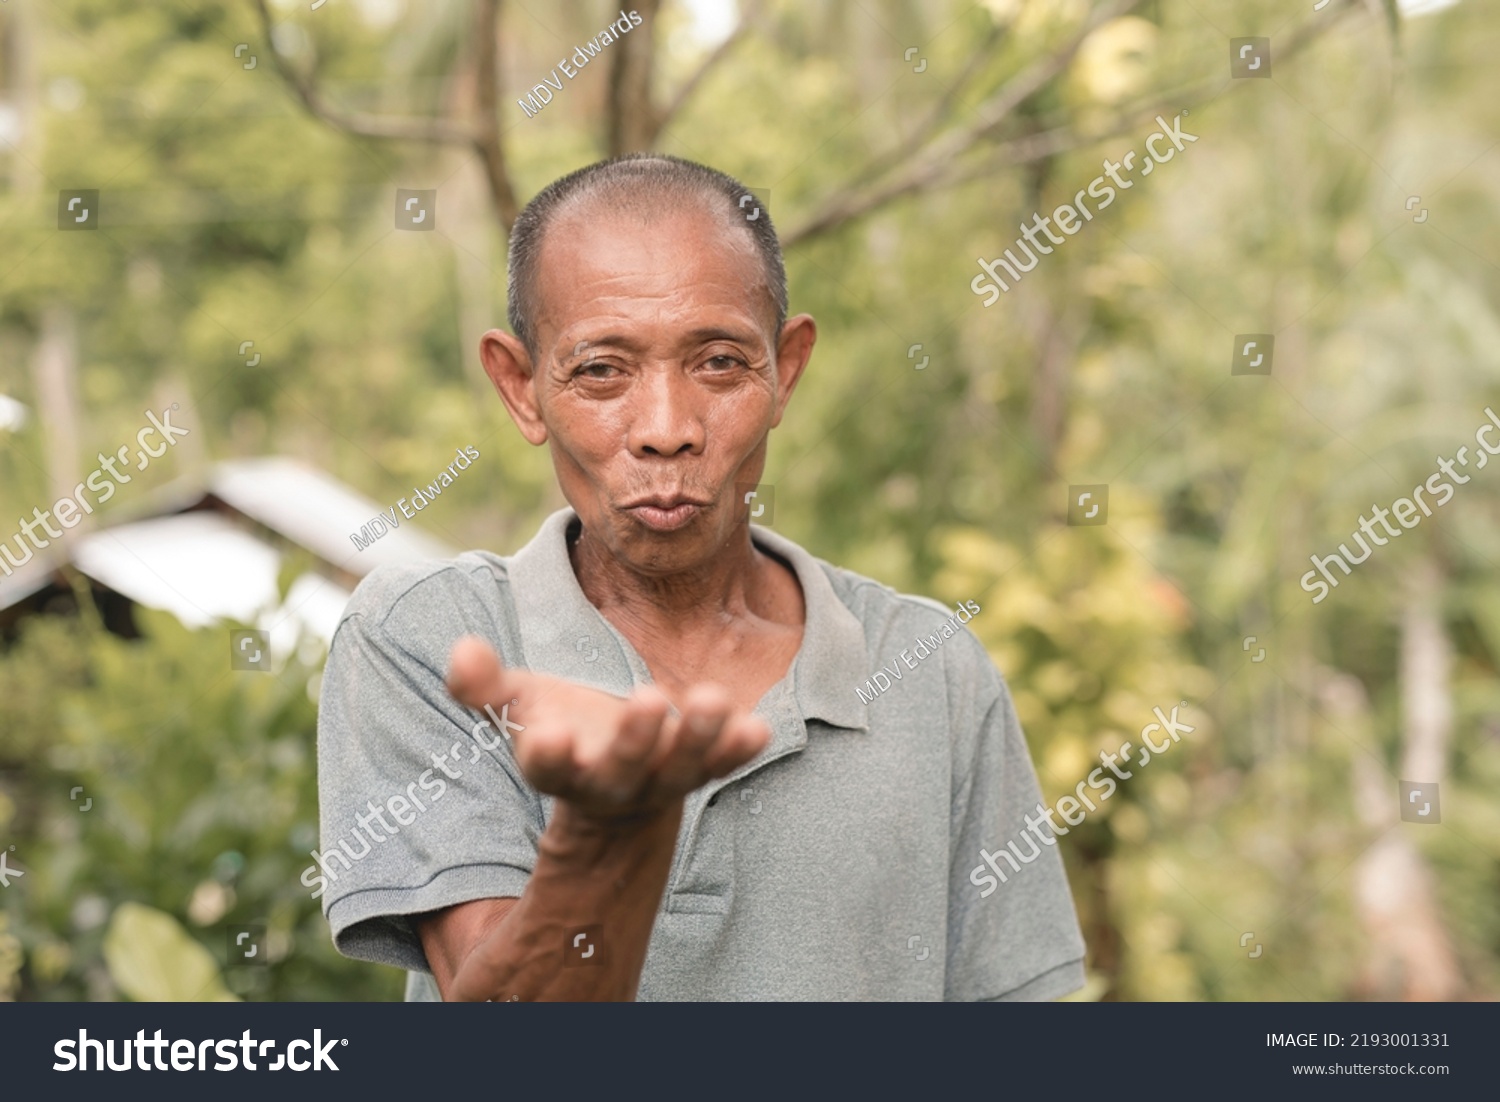 A funny old filipino man blows an imaginary kiss. Pursed lips signifying either a lighthearted gesture or catcalling. Outdoor scene. #2193001331